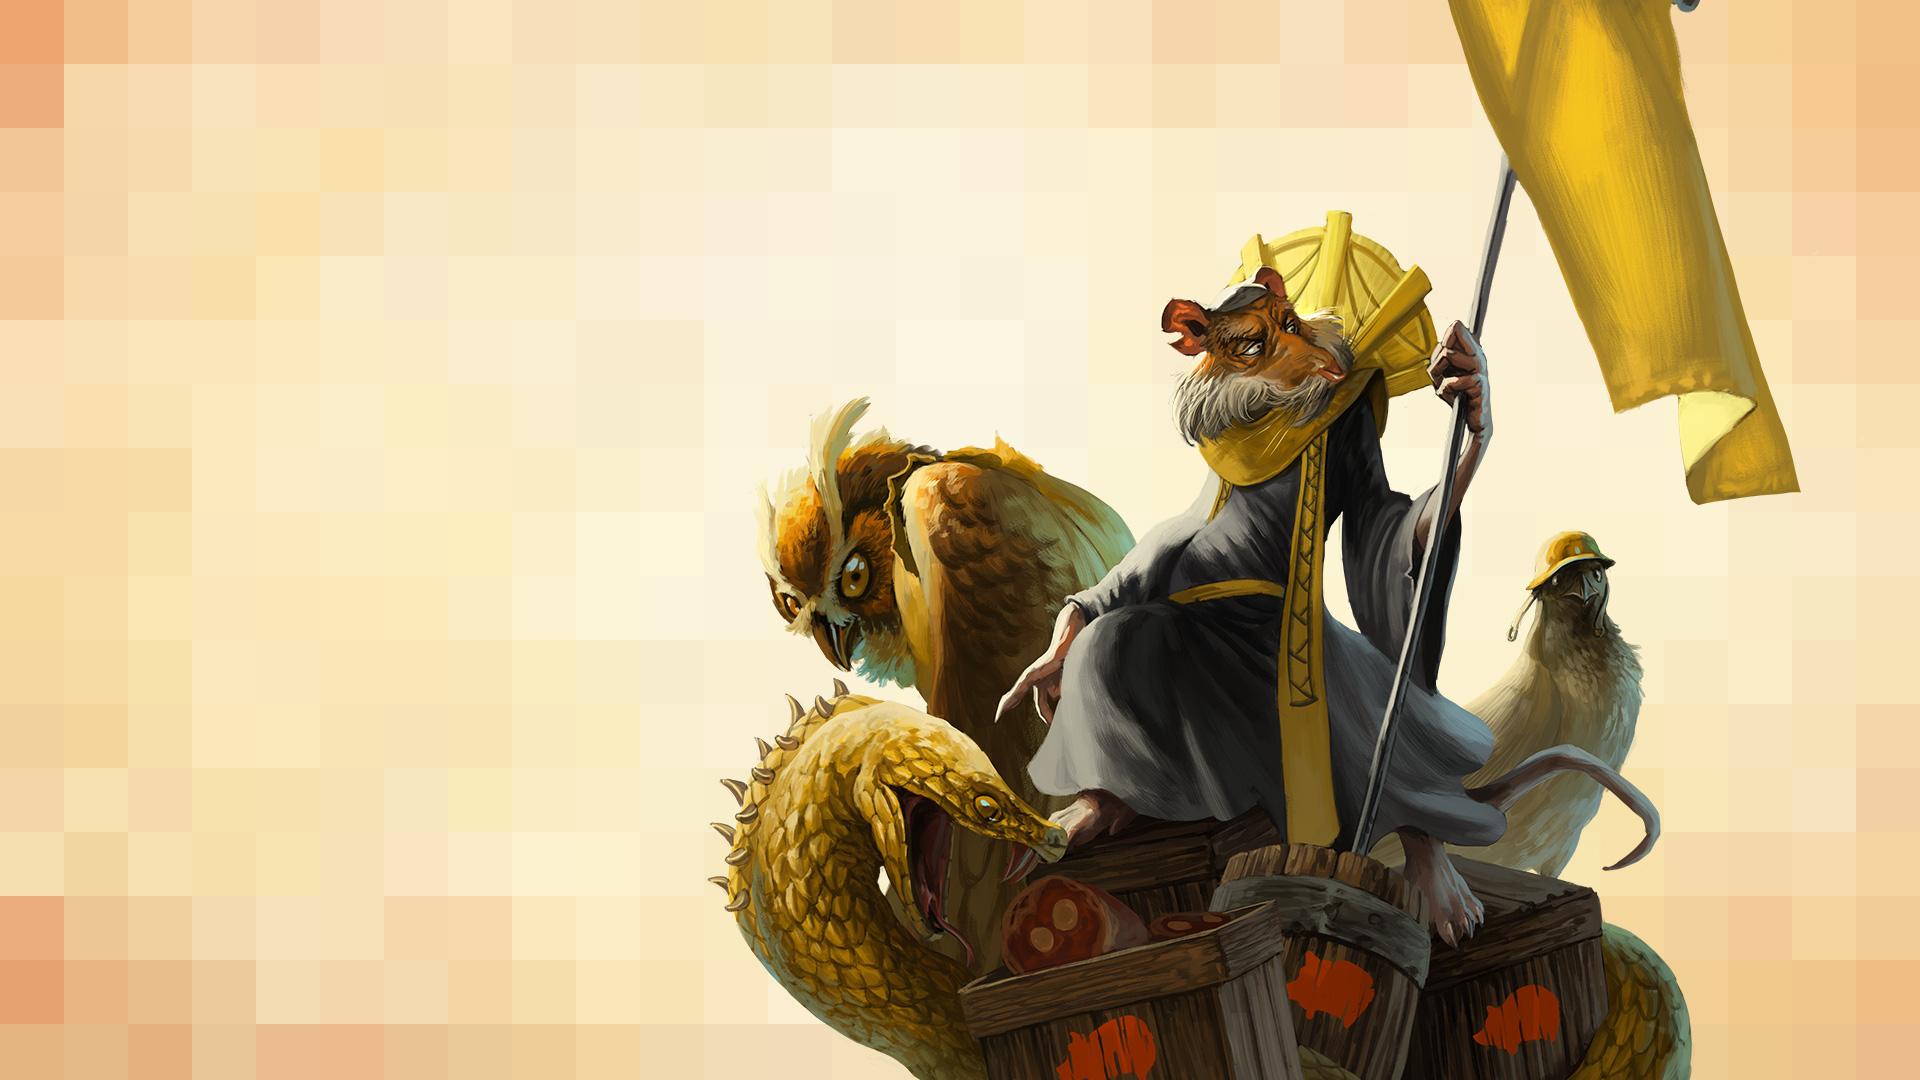 Archimedes. Wallpaper from Tooth and Tail